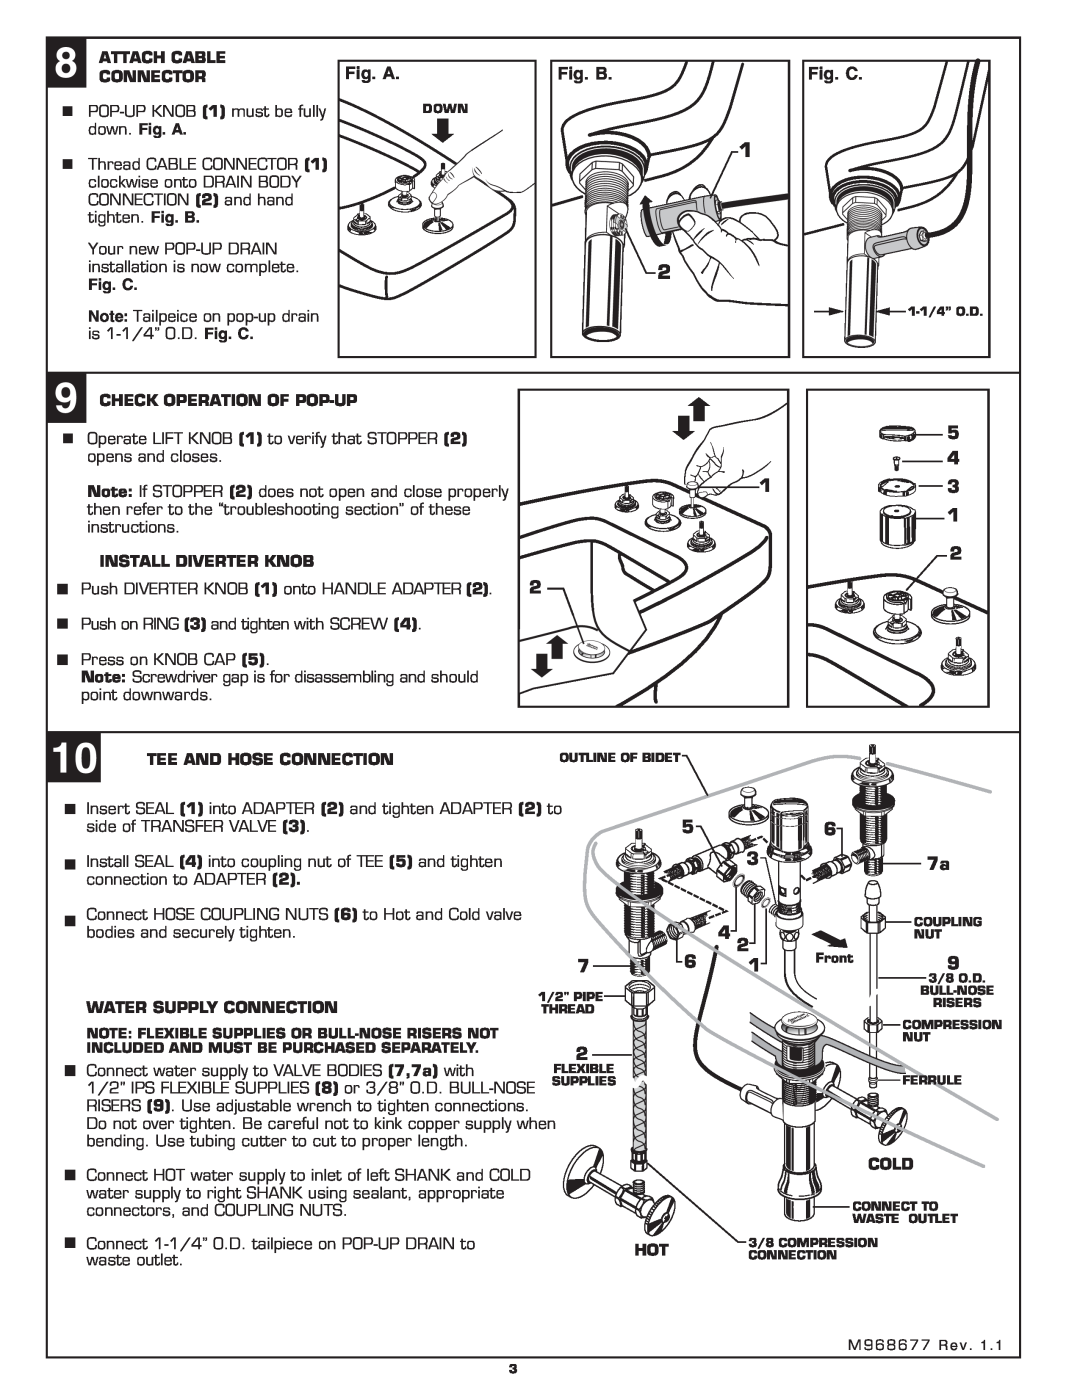 American Standard 3475.5 Attach Cable, Connector, down. Fig. A, Fig. C, Check Operation Of Pop-Up, Install Diverter Knob 